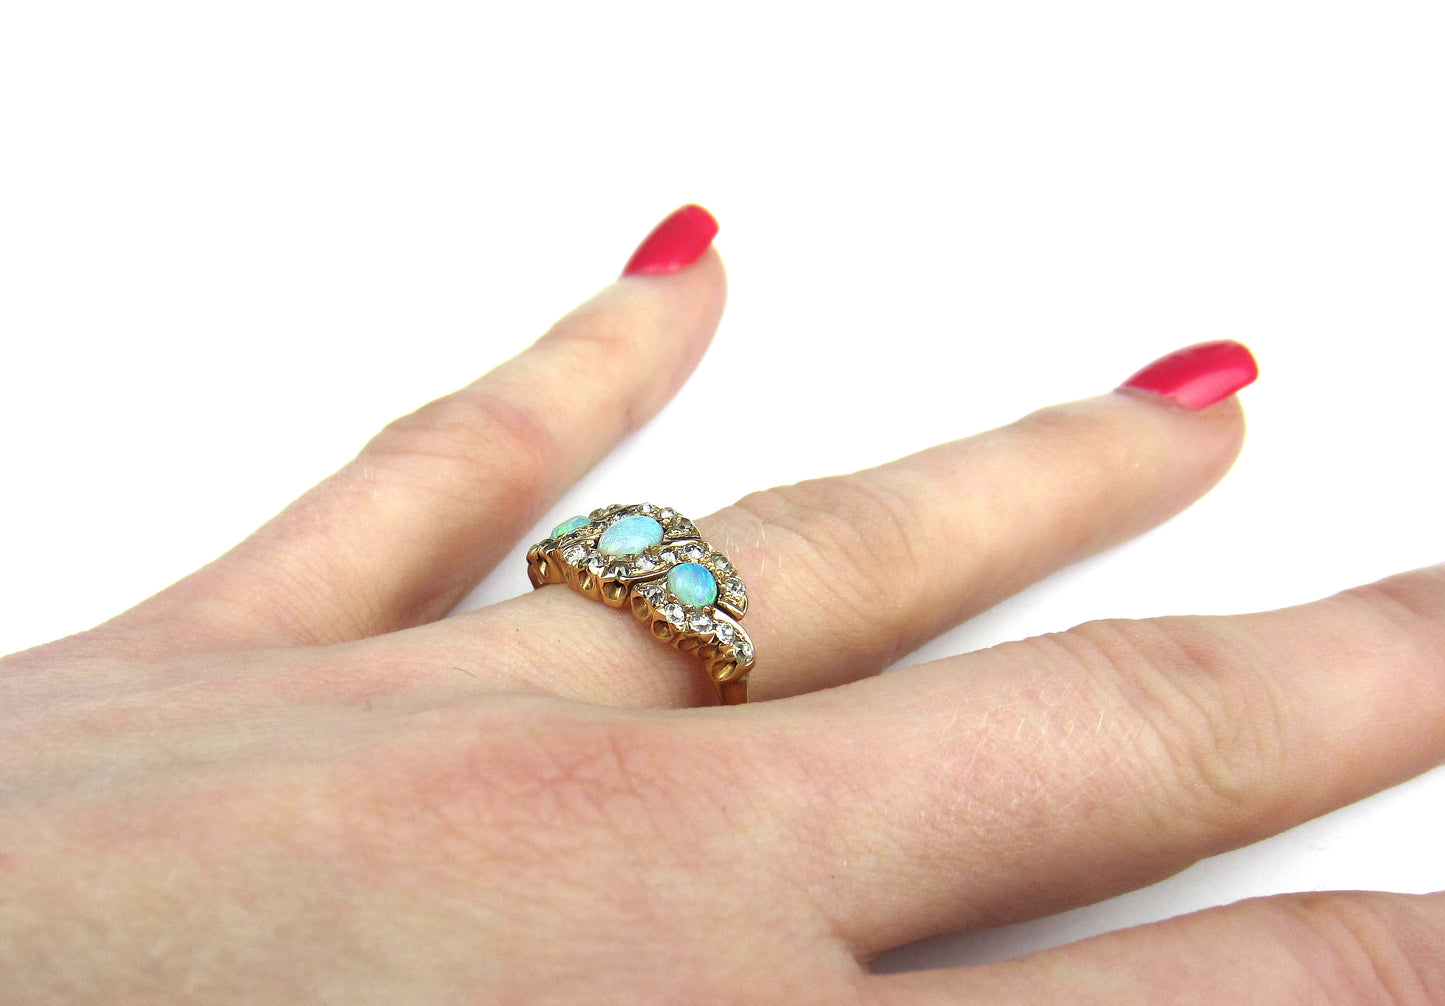 SOLD Victorian Opal and Diamond Ring 14k c. 1900